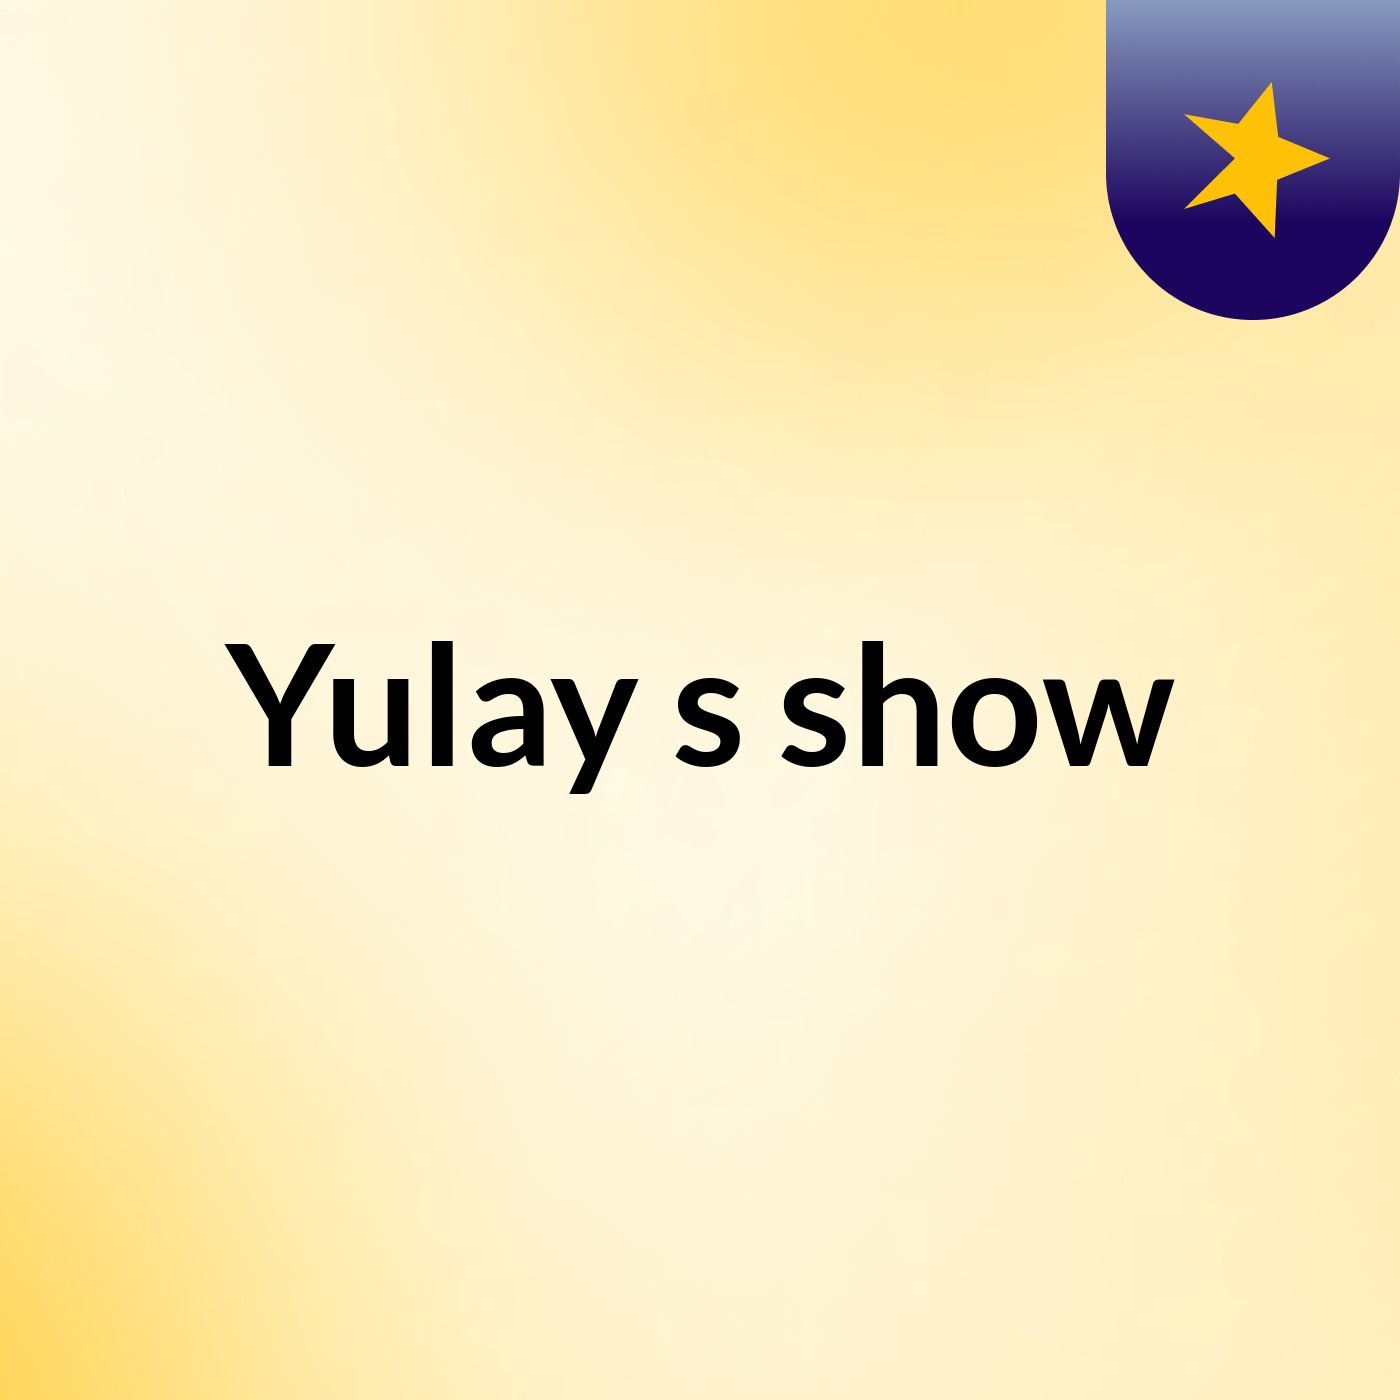 Yulay's show